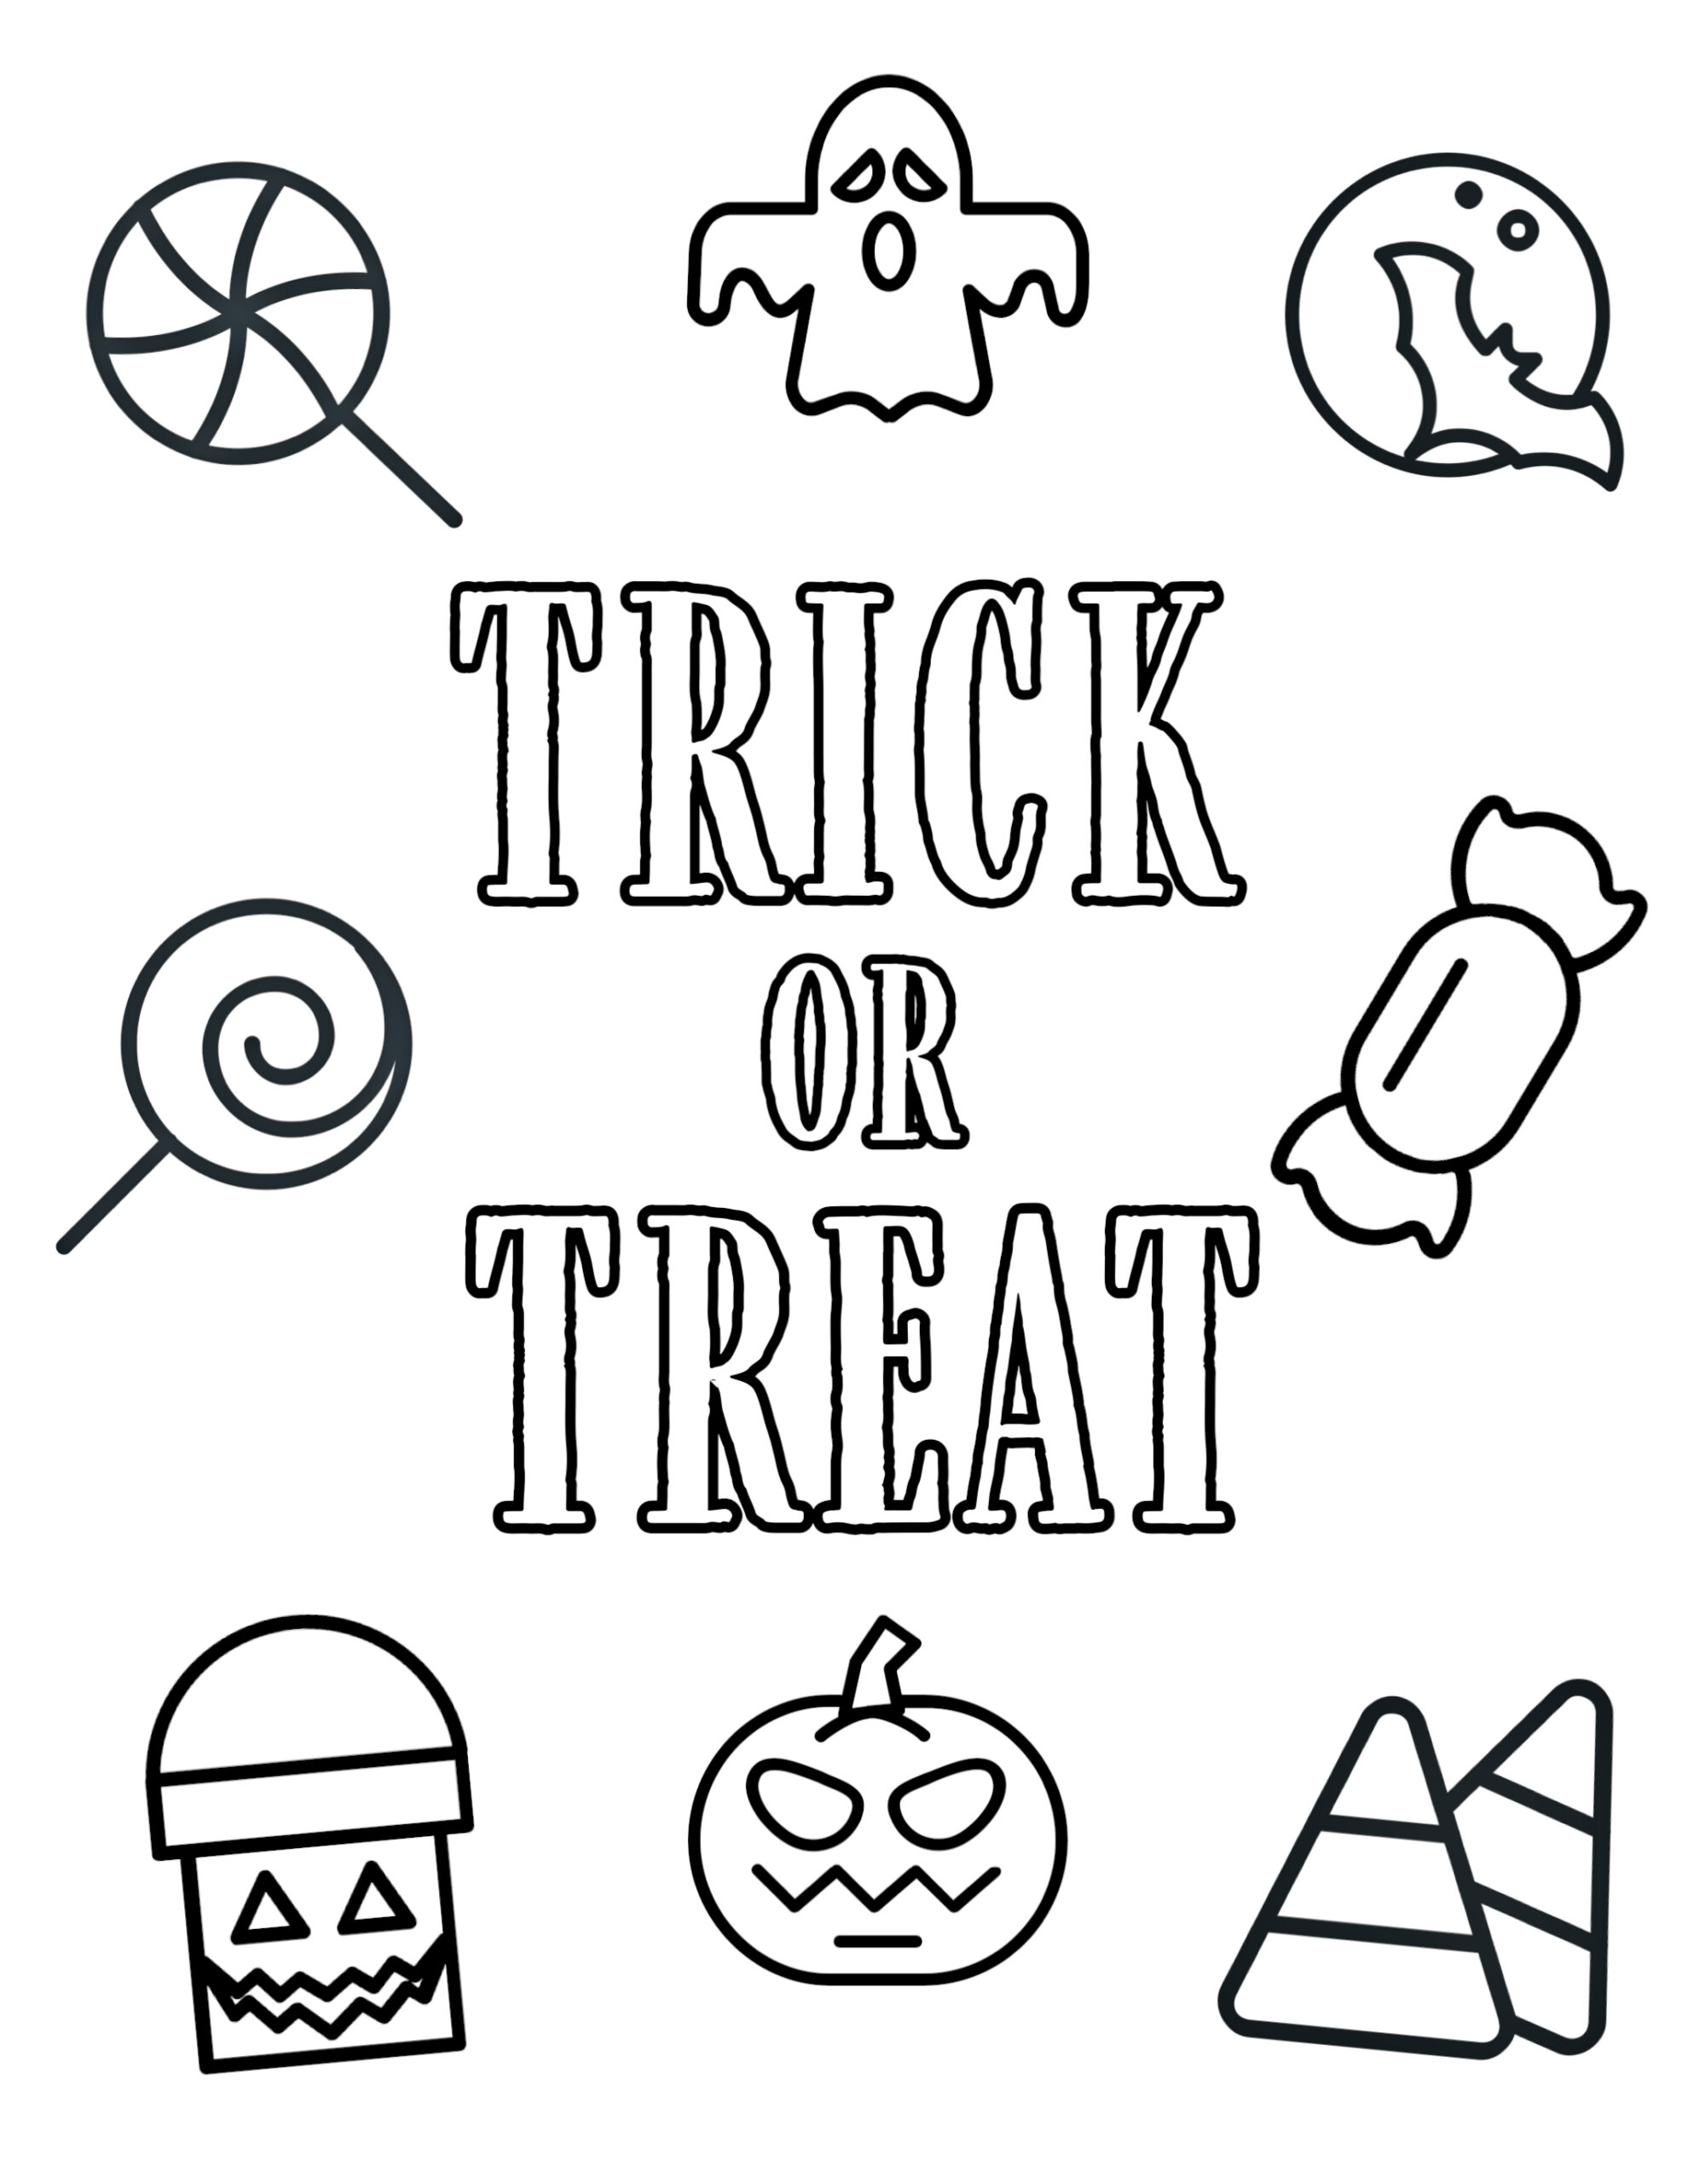 happy-halloween-coloring-pages-75-halloween-coloring-pages-free